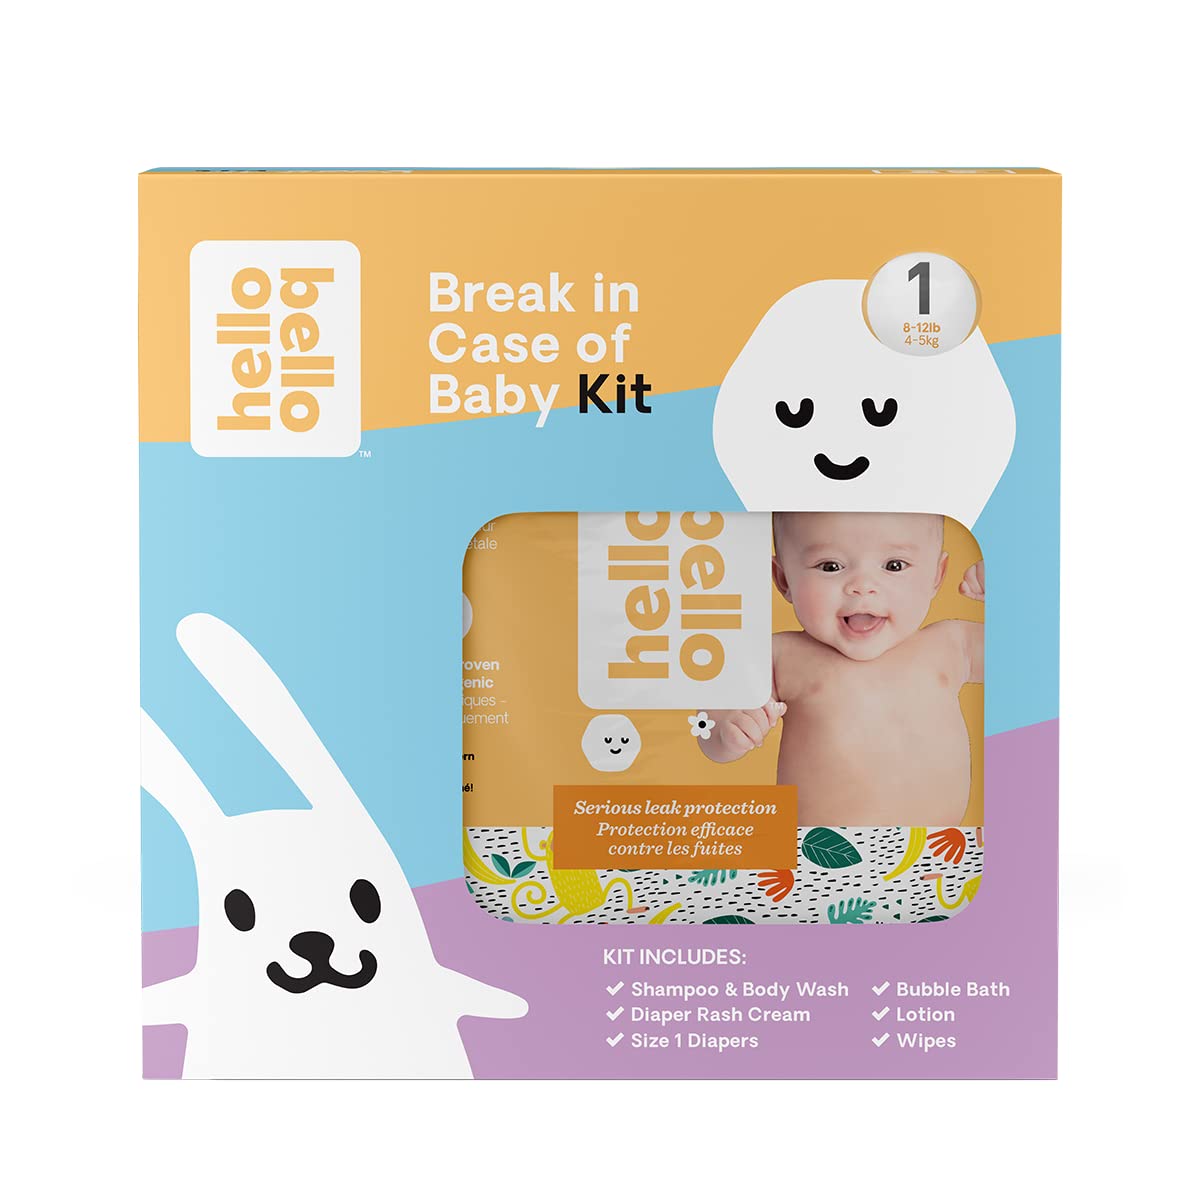 Hello Bello Break in Case of Baby Kit Gift Set with Shampoo & Body Wash, Bubble Bath, Lotion, Diaper Cream & Size 1 Diapers | Hypoallergenic, Vegan and Cruelty Free for Babies and Kids